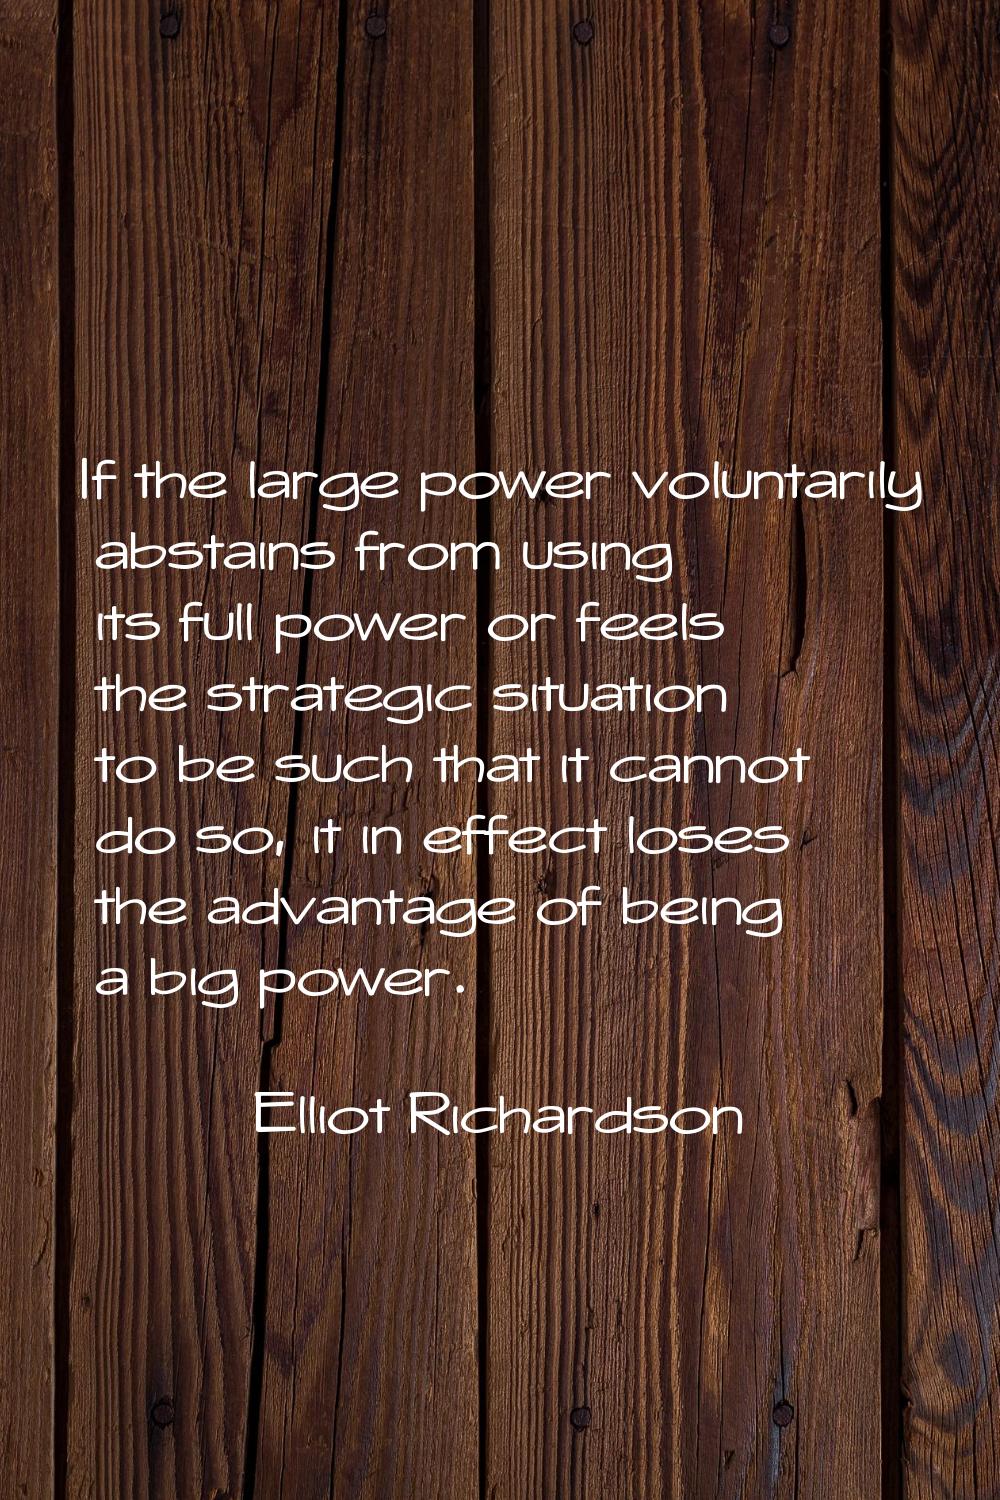 If the large power voluntarily abstains from using its full power or feels the strategic situation 